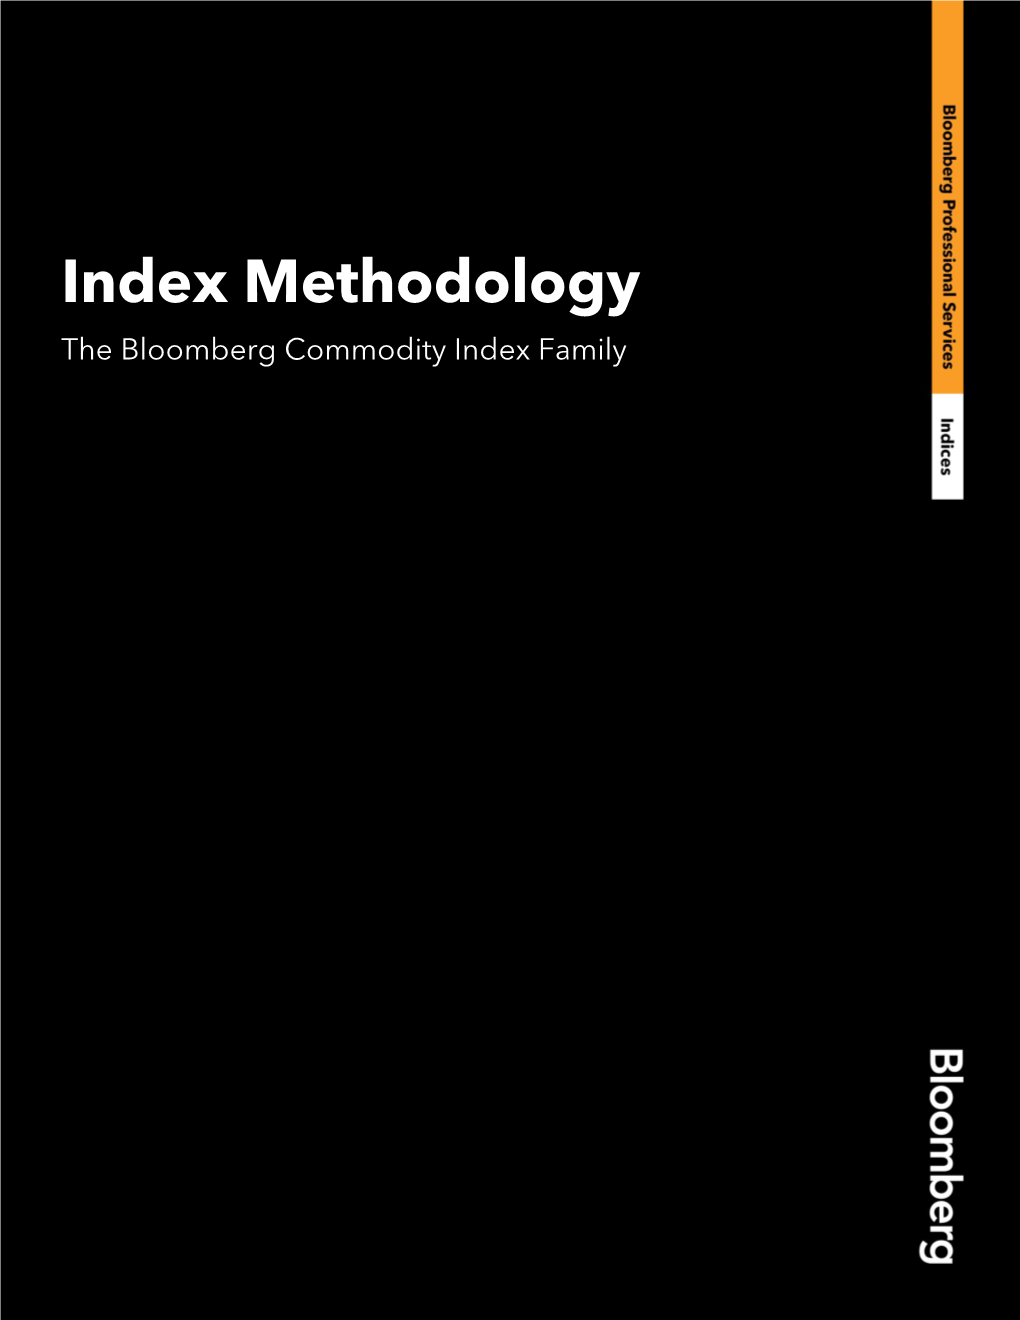 The Bloomberg Commodity Index Methodology